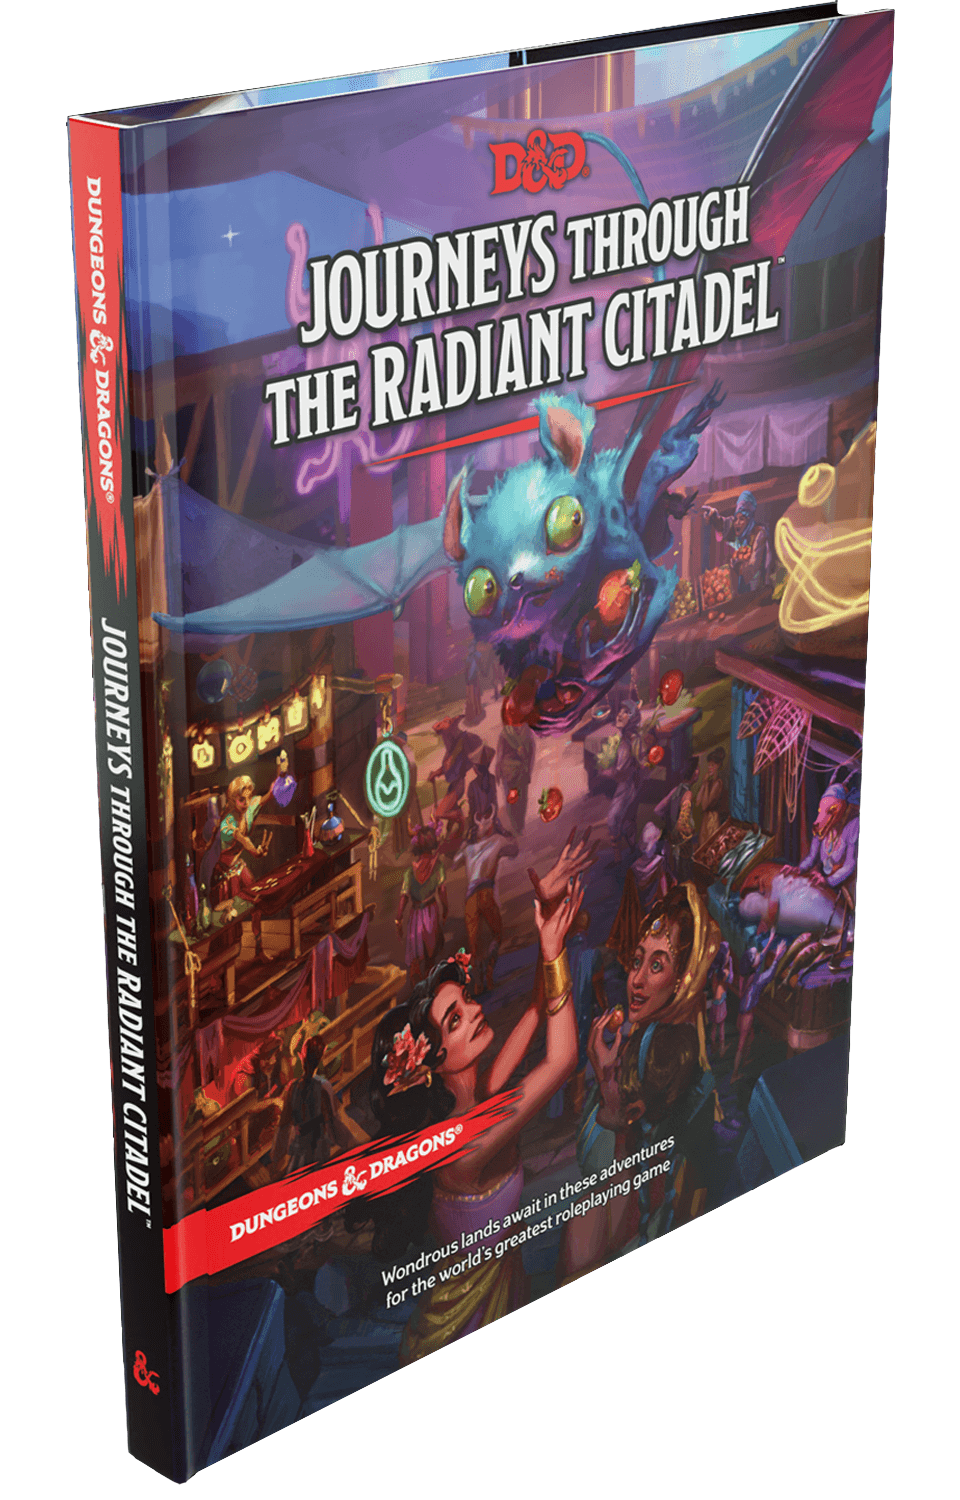 Dungeons & Dragons 5th edition - Journeys Through the Radiant Citadel